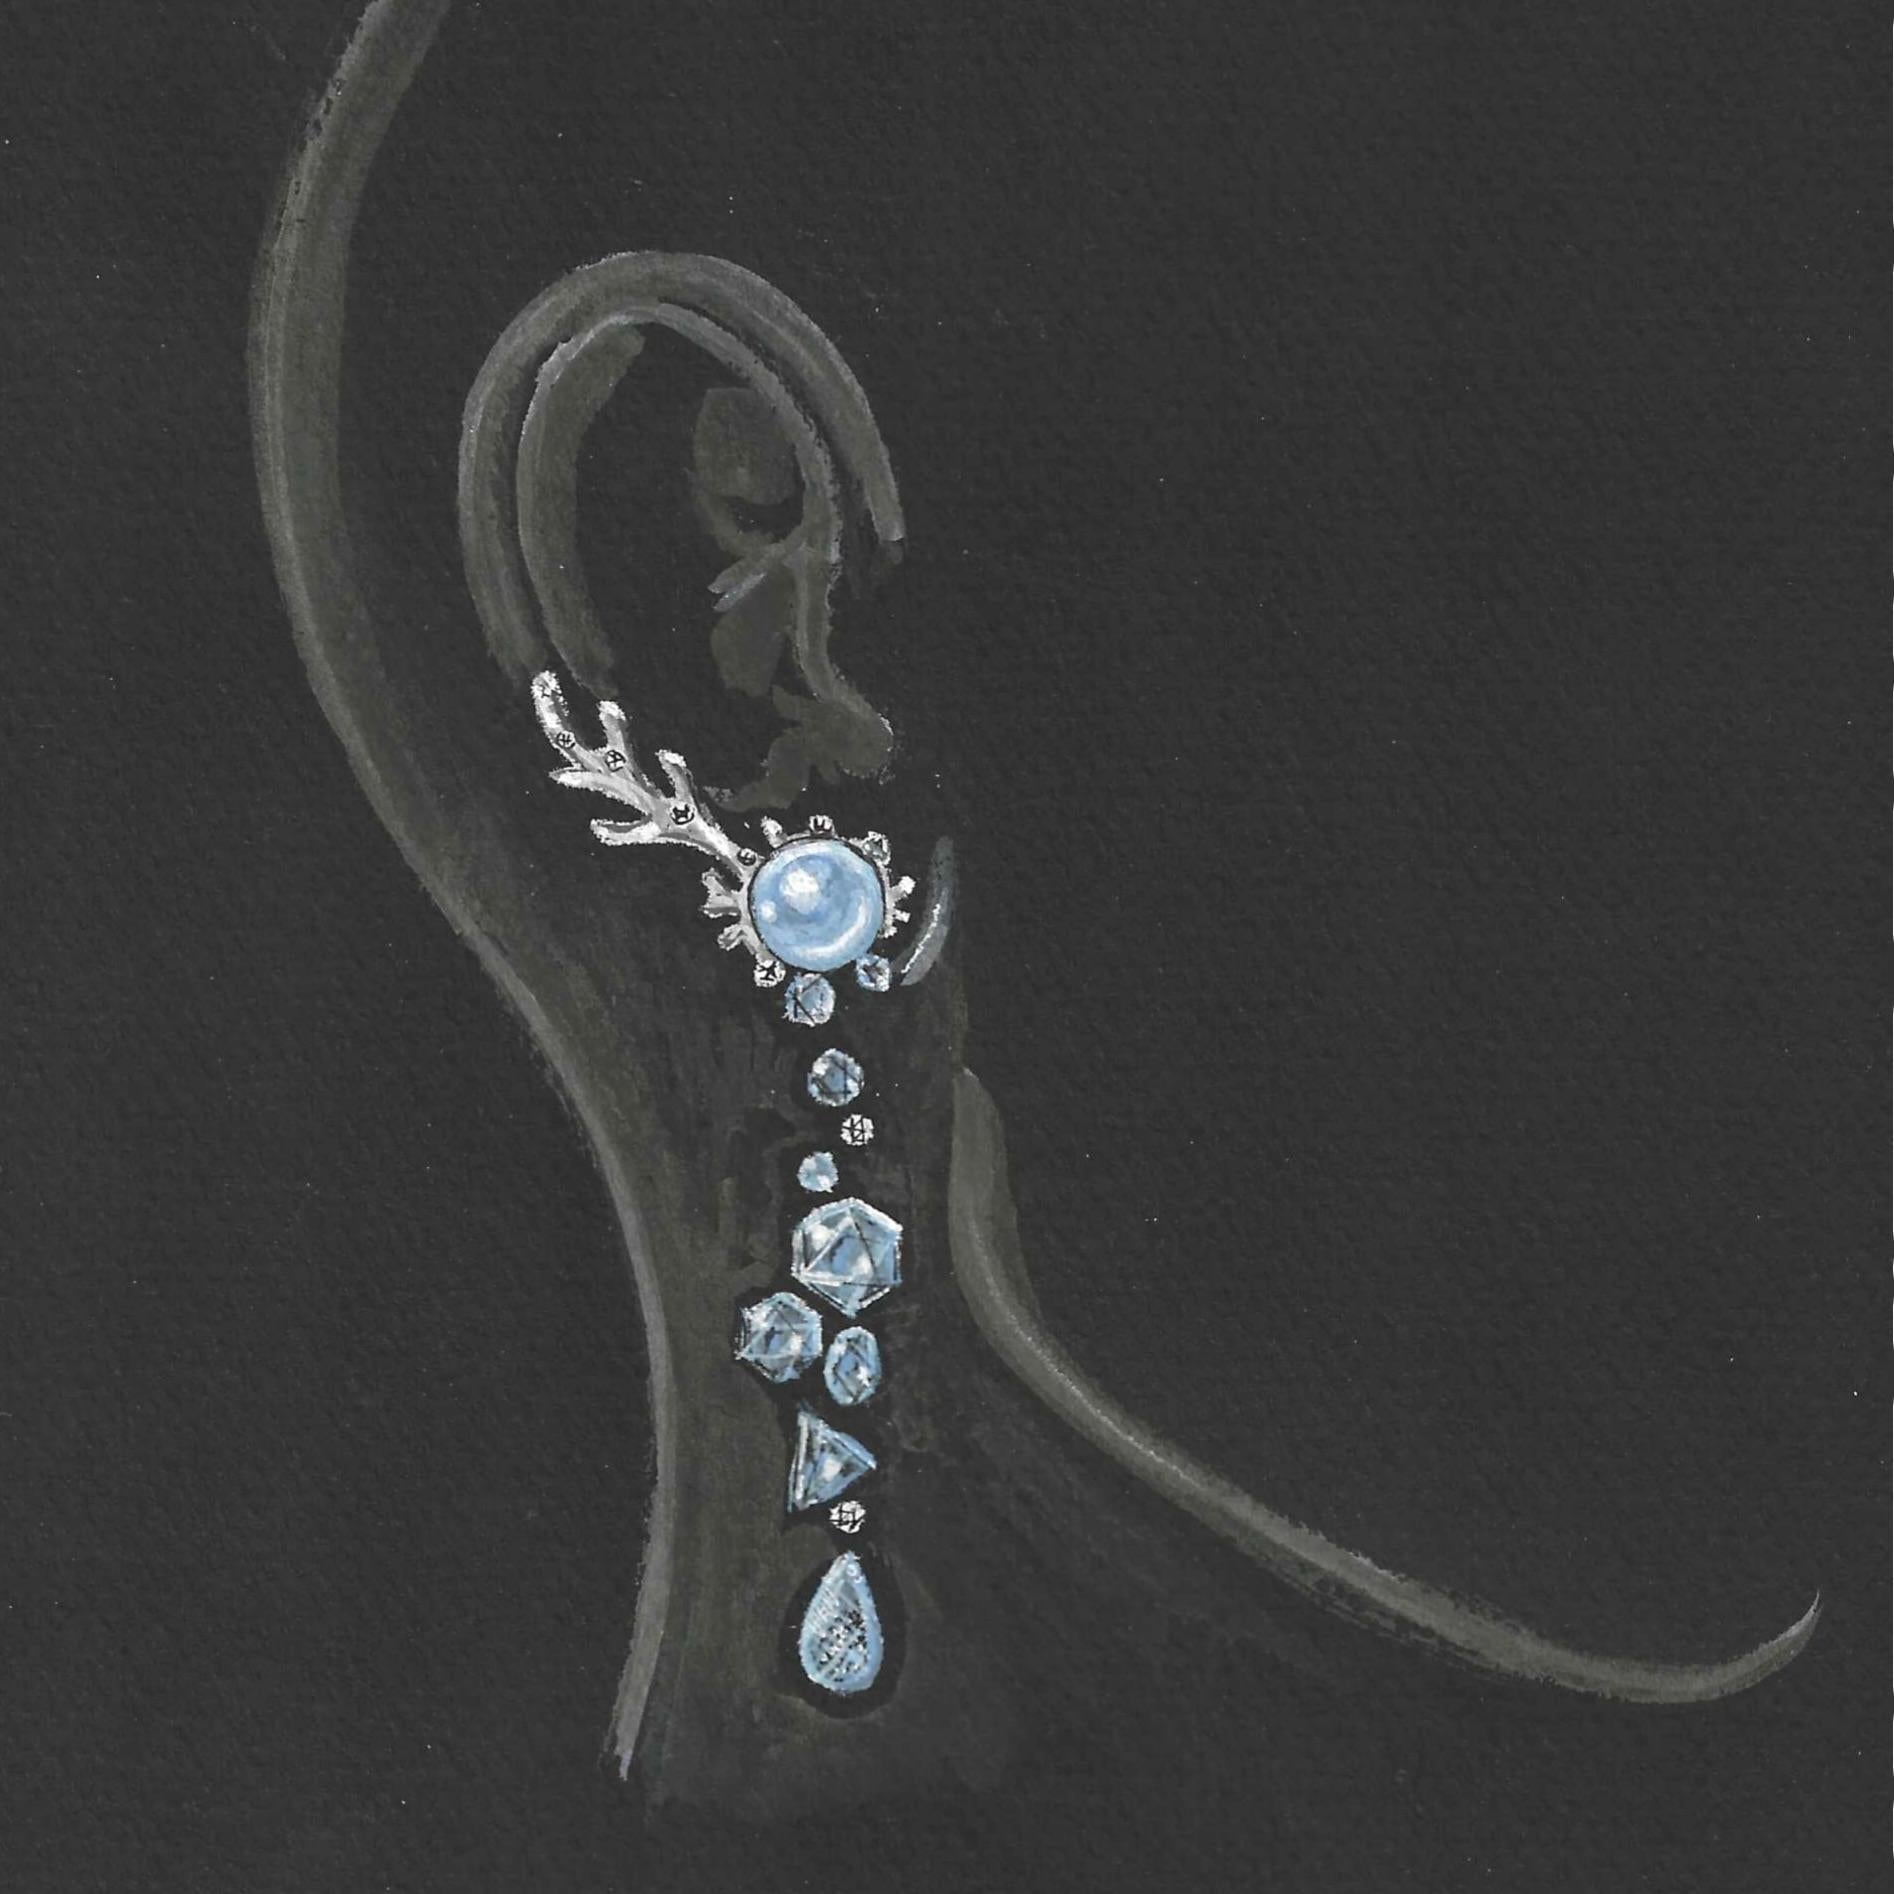 Ciclo Dell’acqua, 18k White Gold Earrings Set with Diamonds, Aquamarines, Pearls In New Condition For Sale In Montréal, Québec